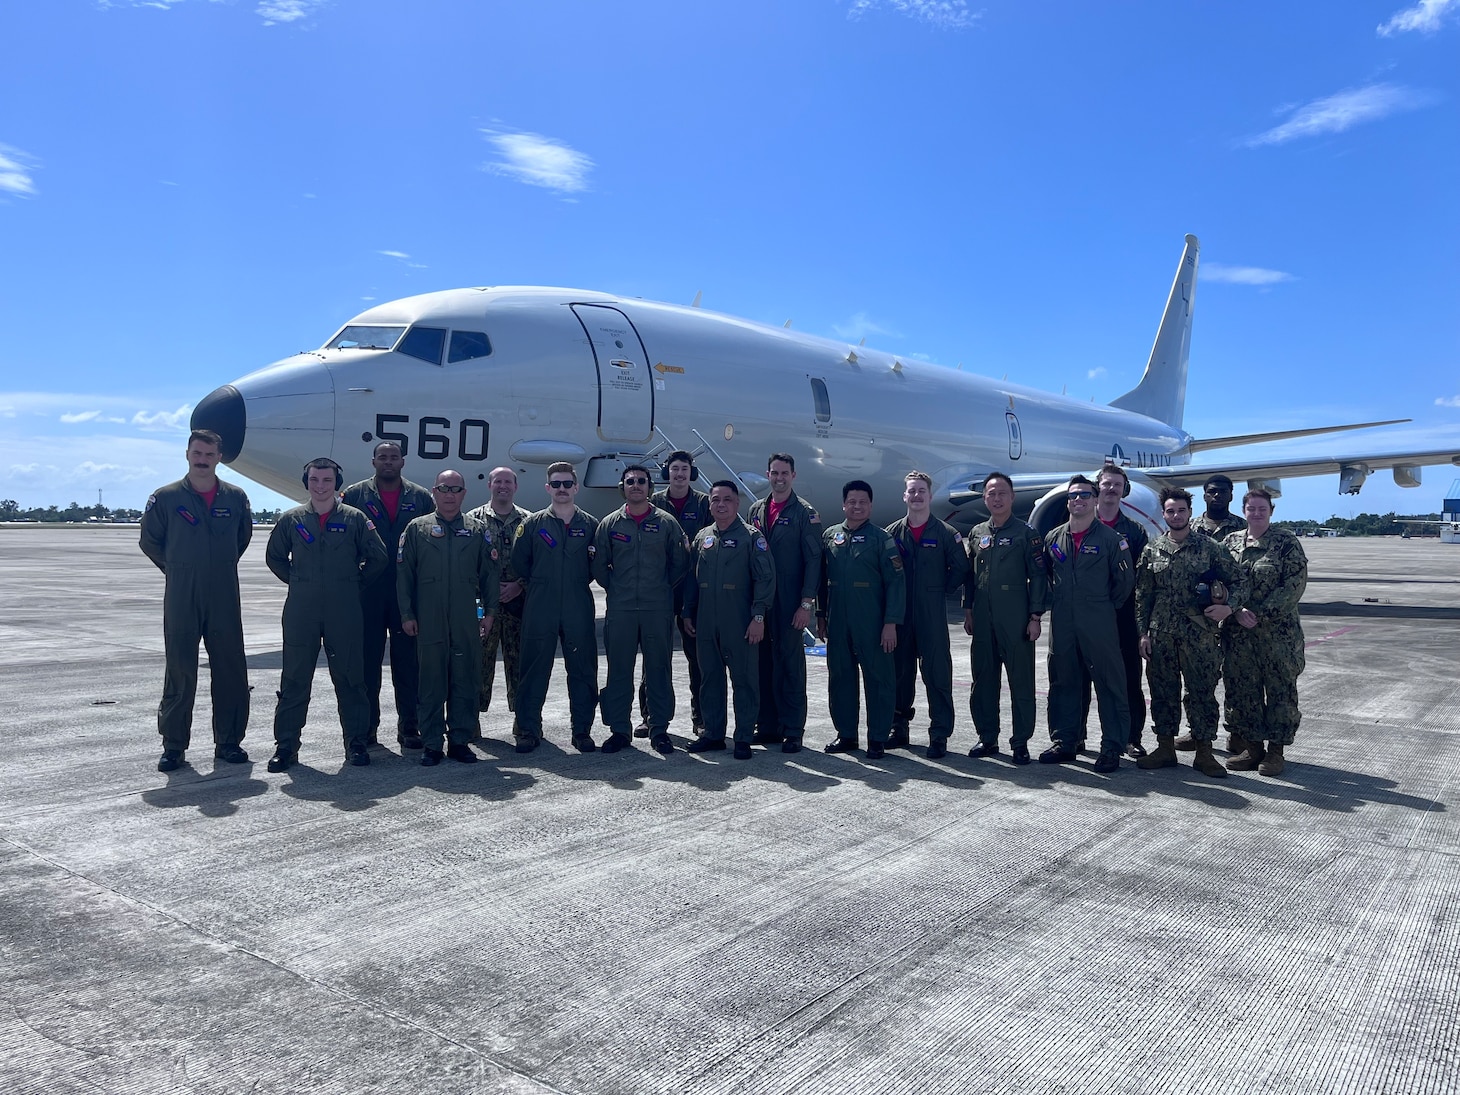 Sailors assigned to the “Red Lancers” of Patrol Squadron (VP) 10 pose for a photo with Maj. Gen. Joannis Leonardi B. Dimaano, commander, Air Mobility Command (center), before taking him on a flight as part of a weeklong engagement promoting joint regional security and partnerships out of Mactan, Philippines. VP-10 is based in Jacksonville, Florida and is currently operating from Kadena Air Base in Okinawa, Japan. It conducts maritime patrol and reconnaissance, as well as theater outreach operations, as part of a rotational deployment to the U.S. 7th Fleet area of operations. (U.S. Navy photo by Lt. j.g. Travis Goebel)